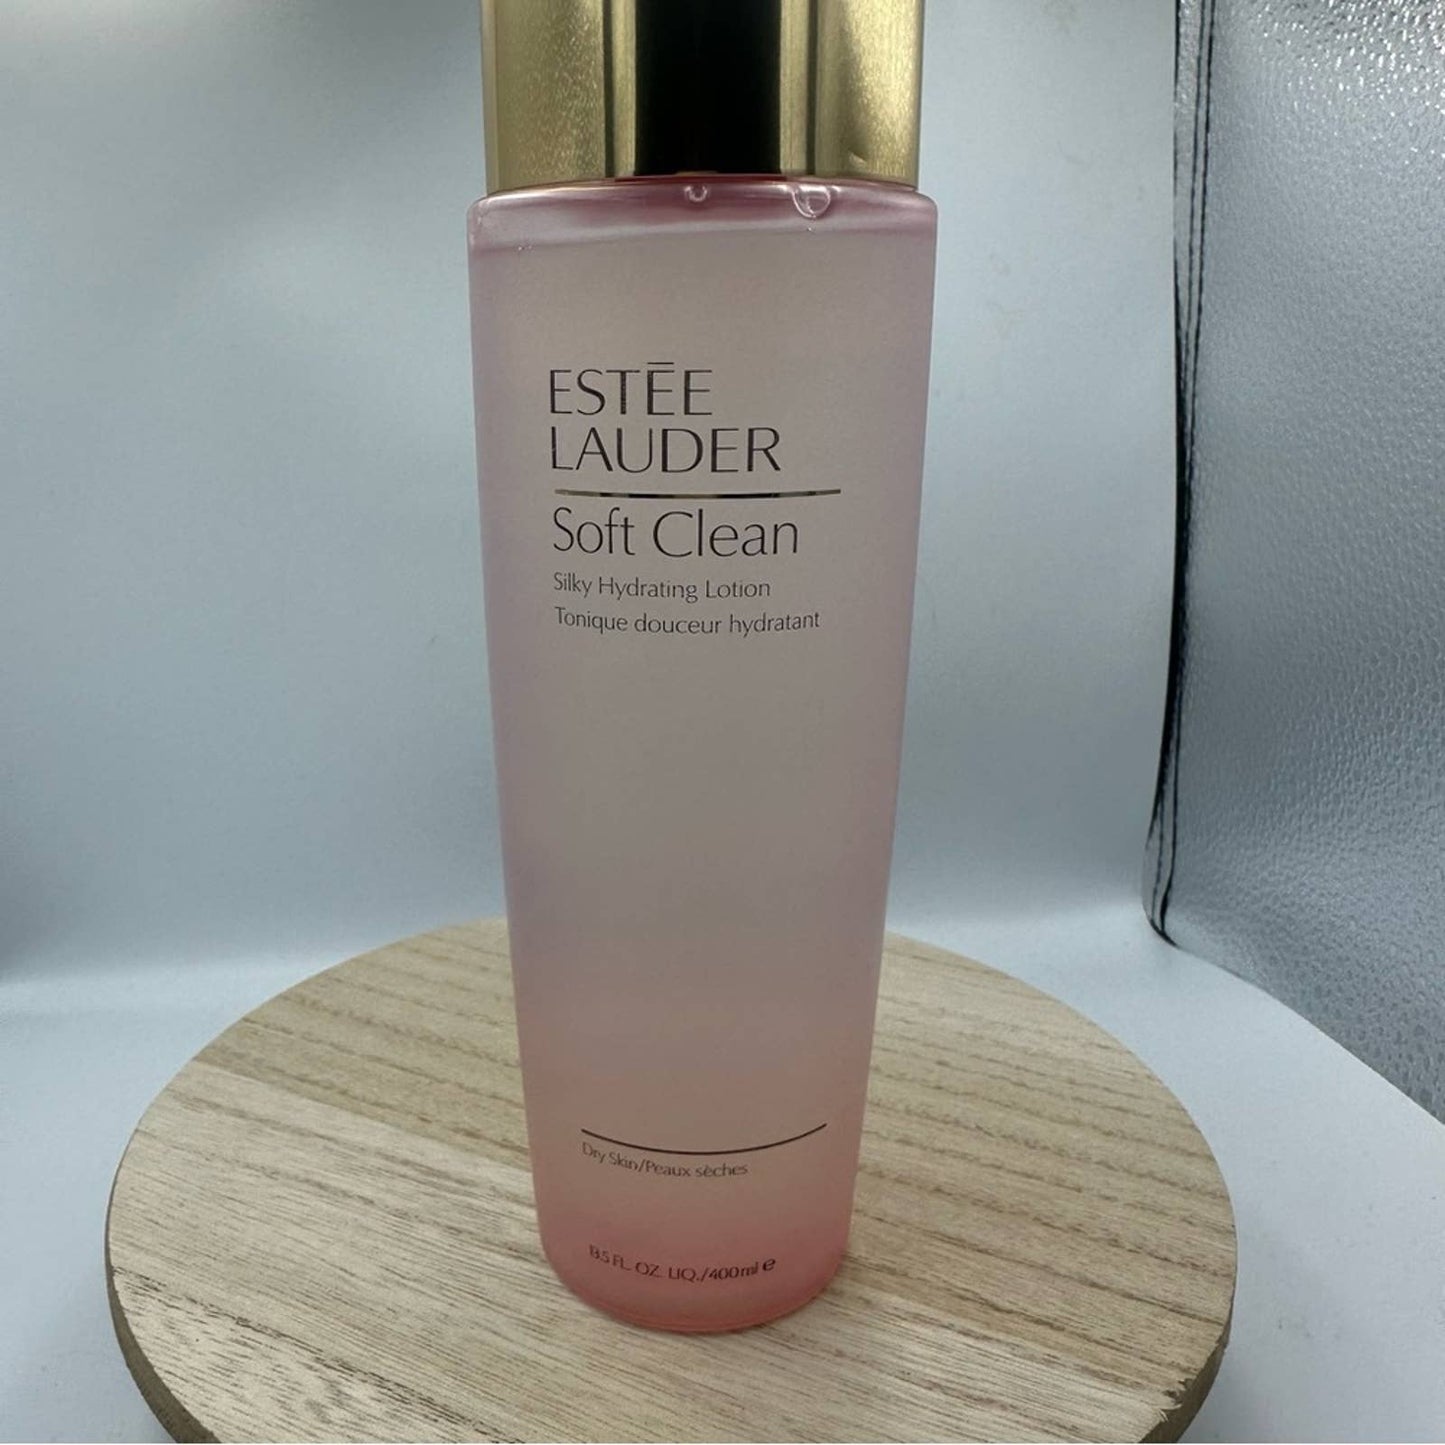 Estee Lauder Soft Clean Skin-Hydrating Lotion